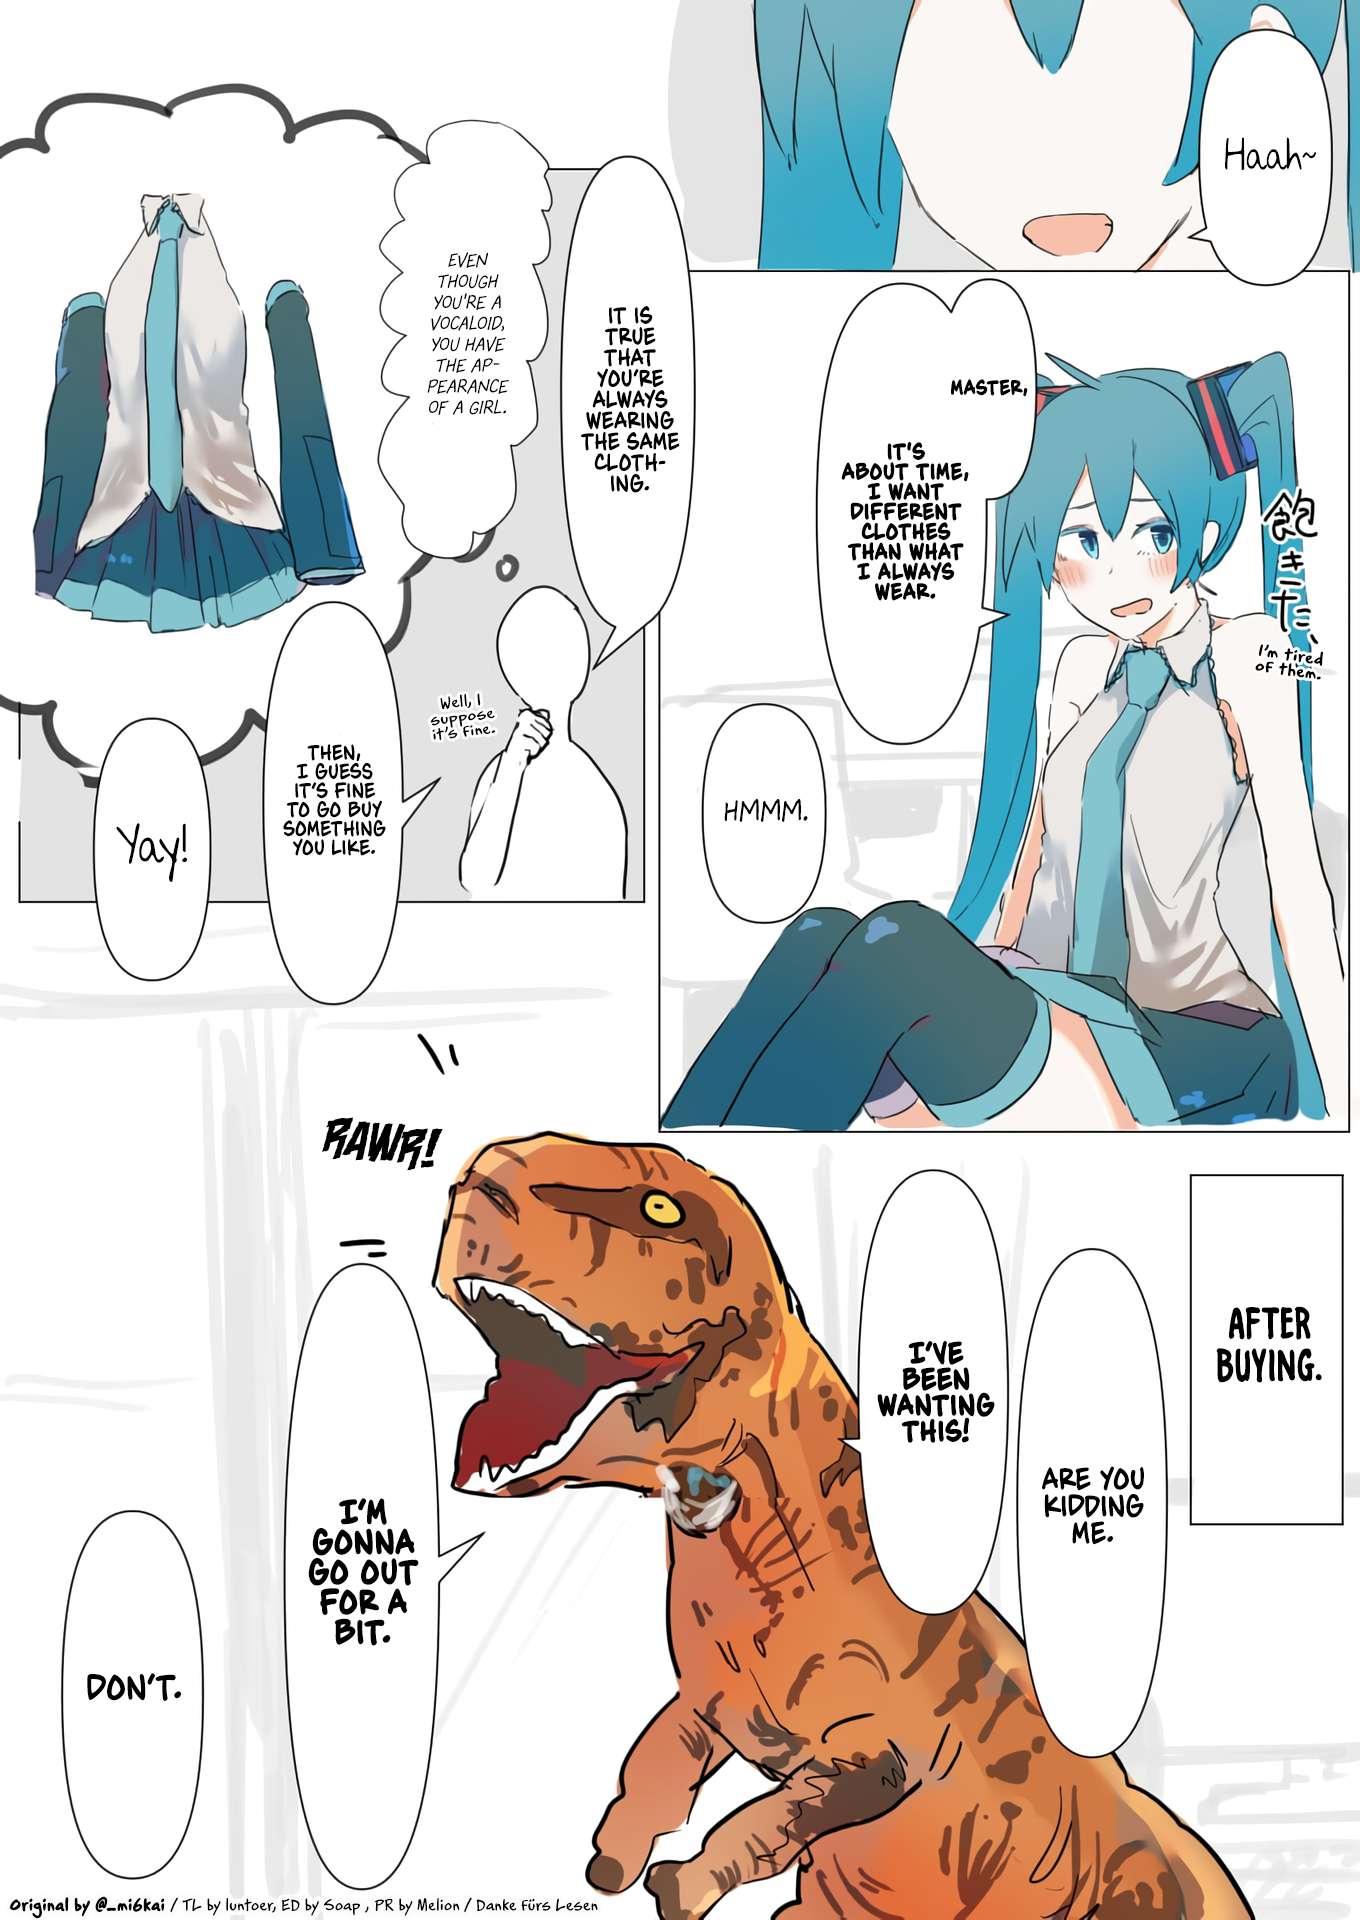 The Daily Life Of Master & Hatsune Miku - chapter 23 - #1